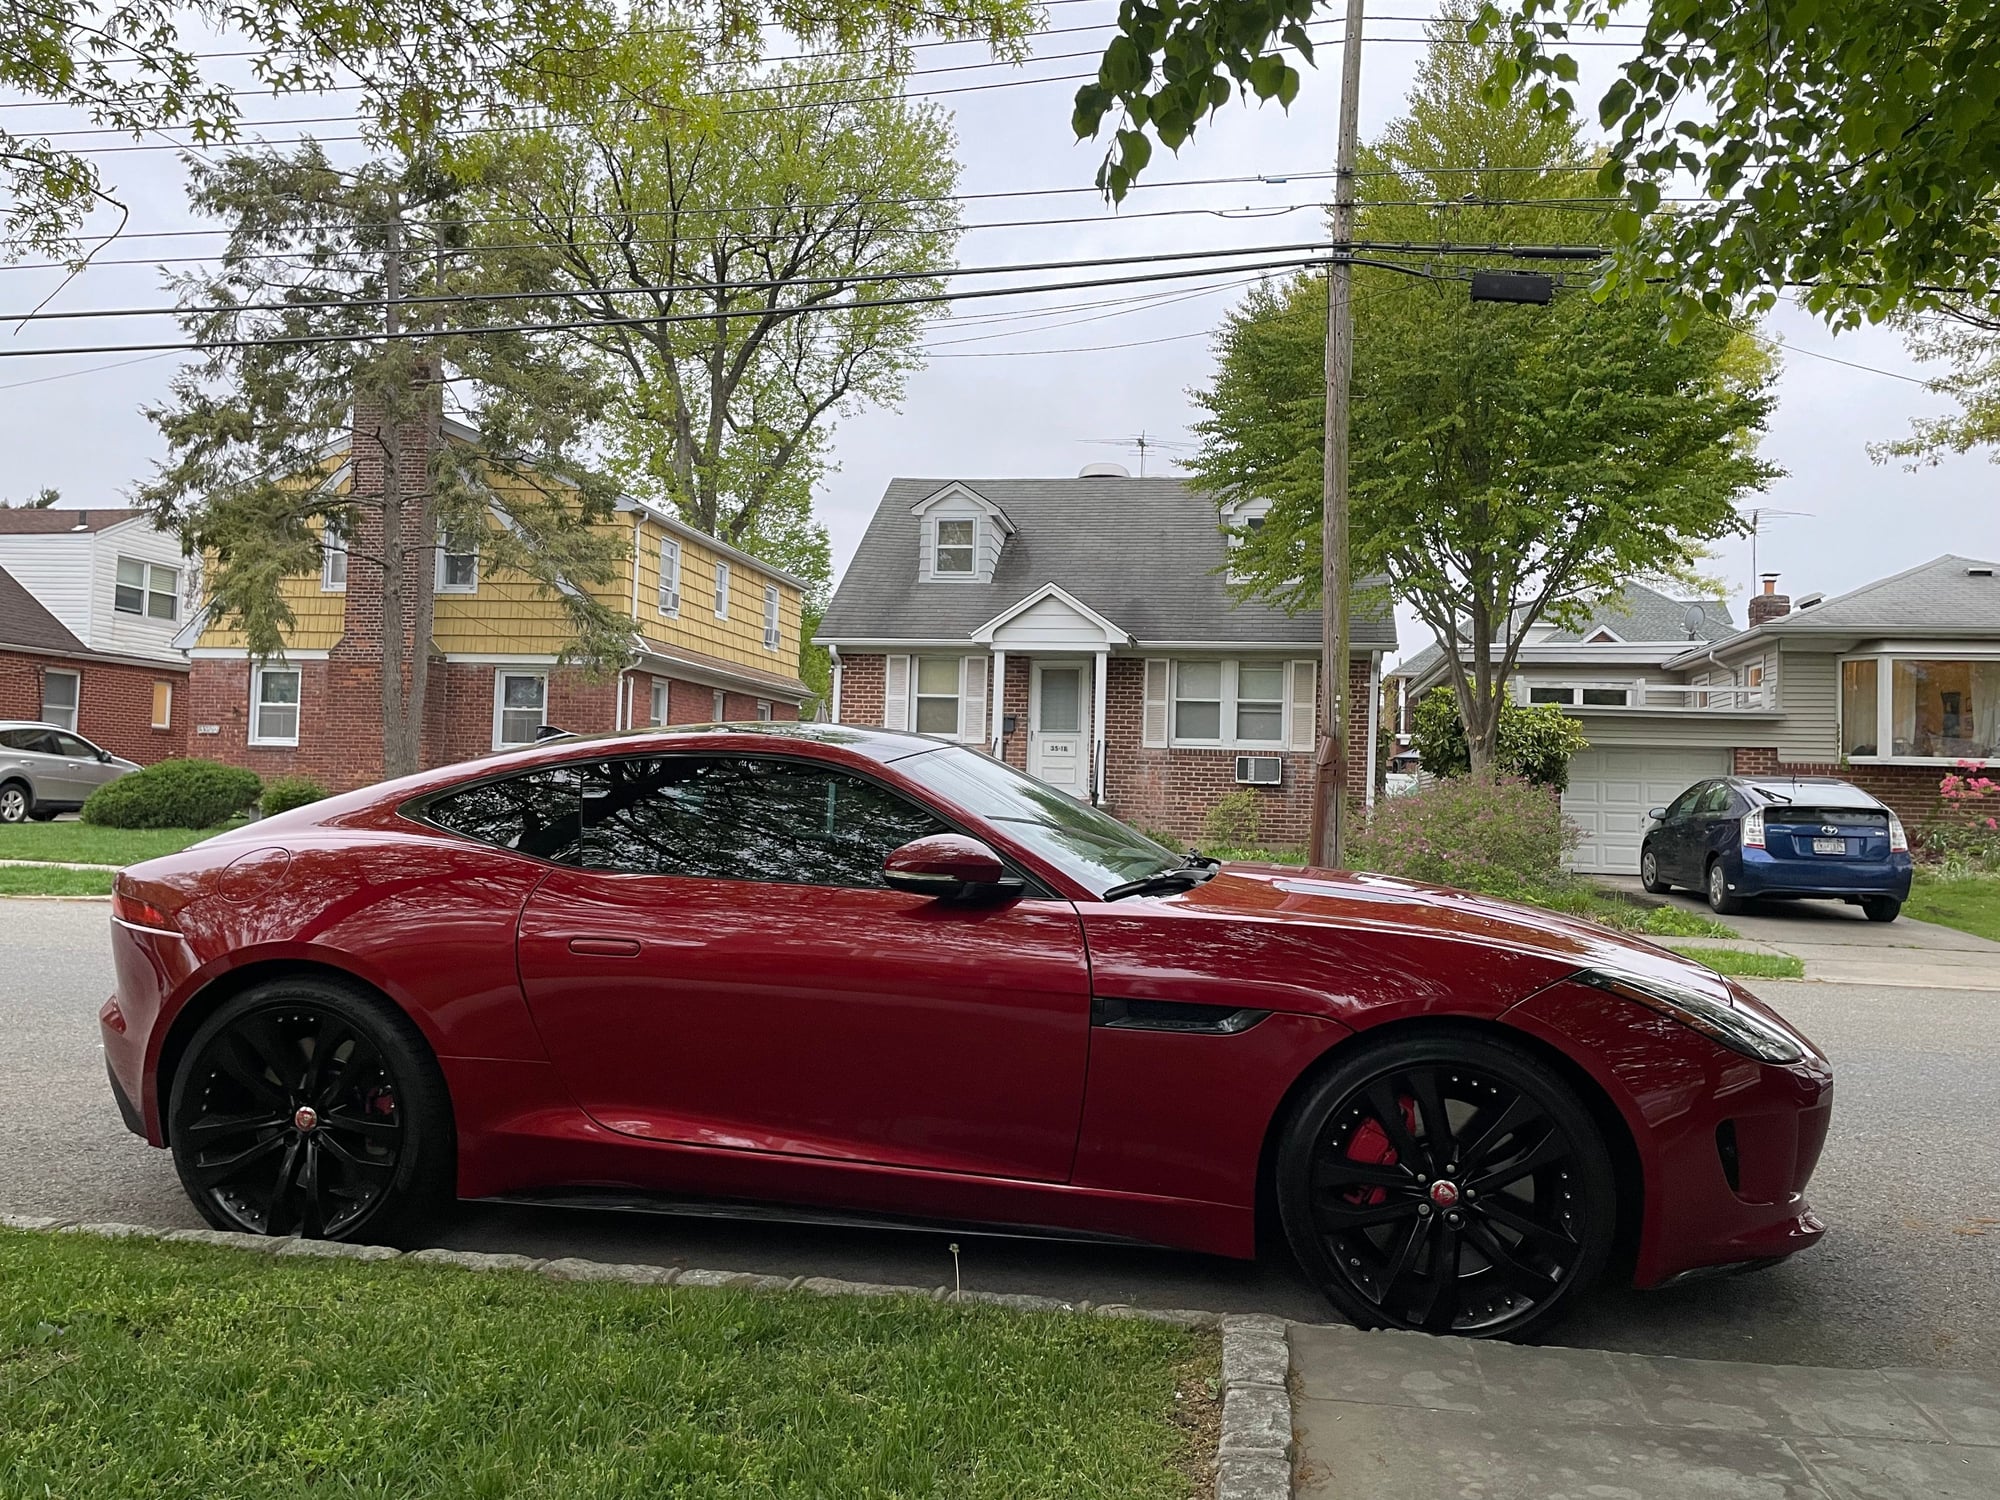 Accessories - Black rims for sale like new - Used - 2014 to 2024 Jaguar F-Type - Brooklyn, NY 11222, United States